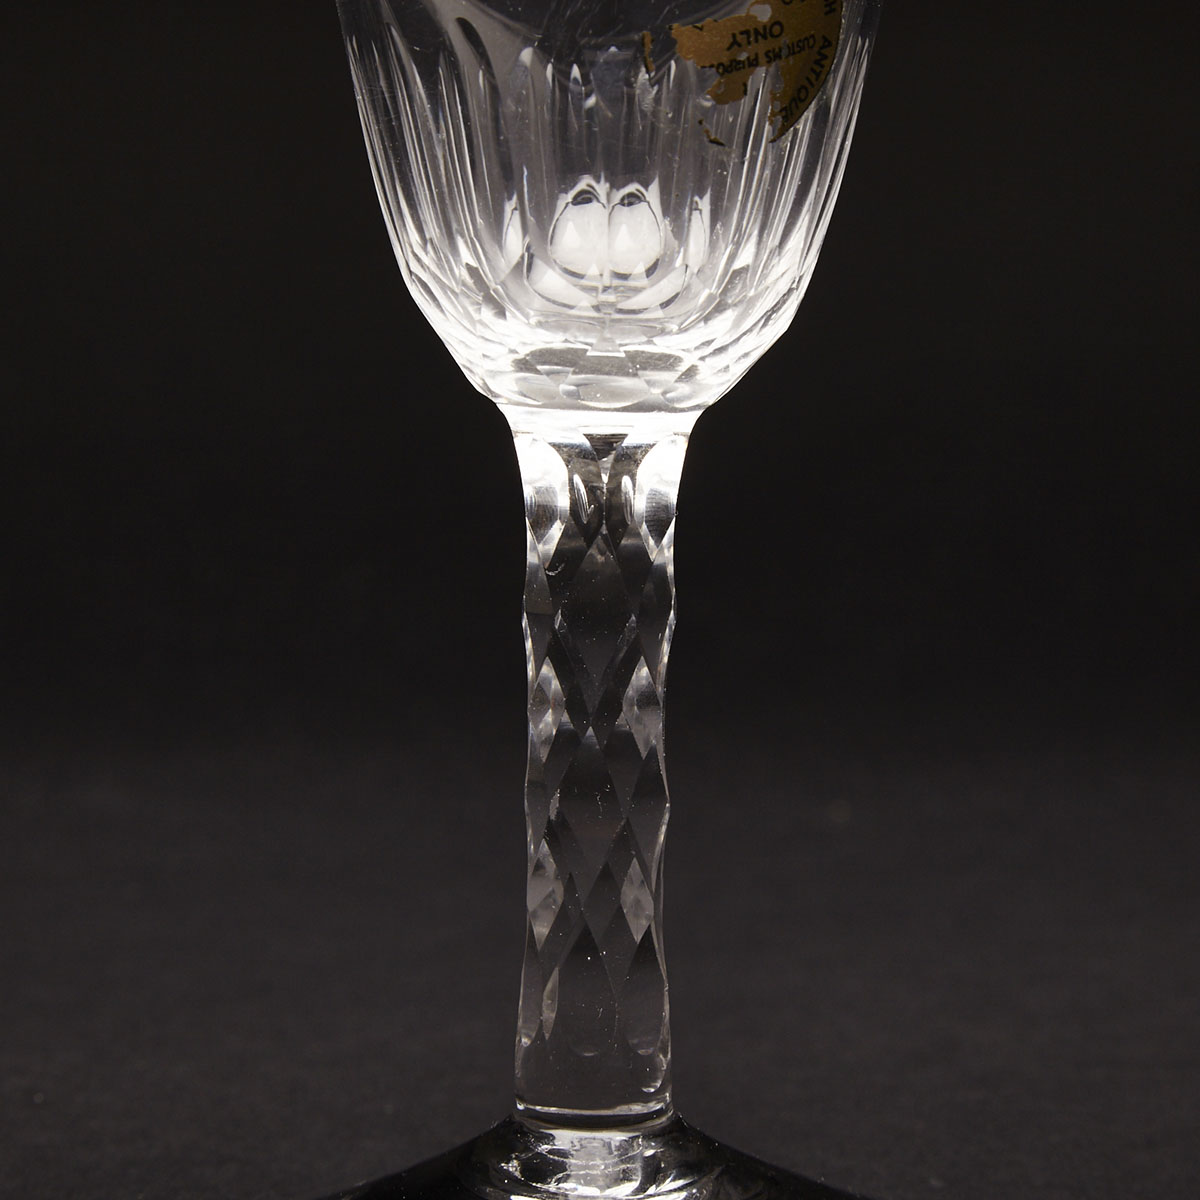 English Faceted Stem Wine Glass, 18th century